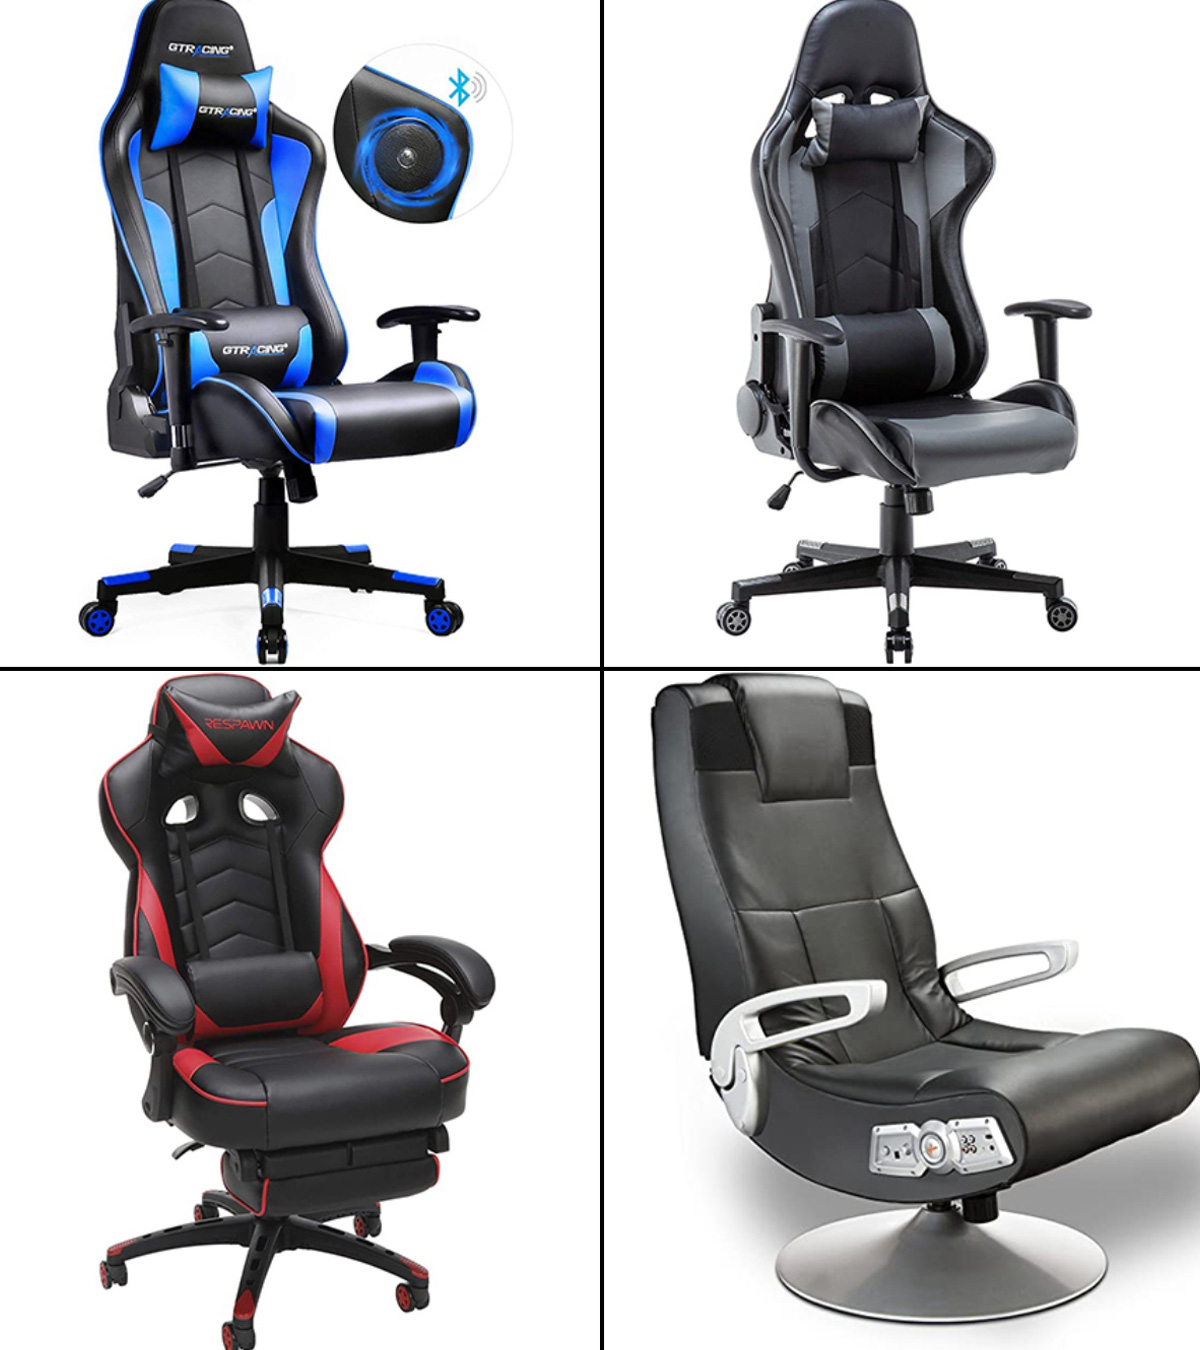 15 Best Gaming Chairs For Kids In 2021